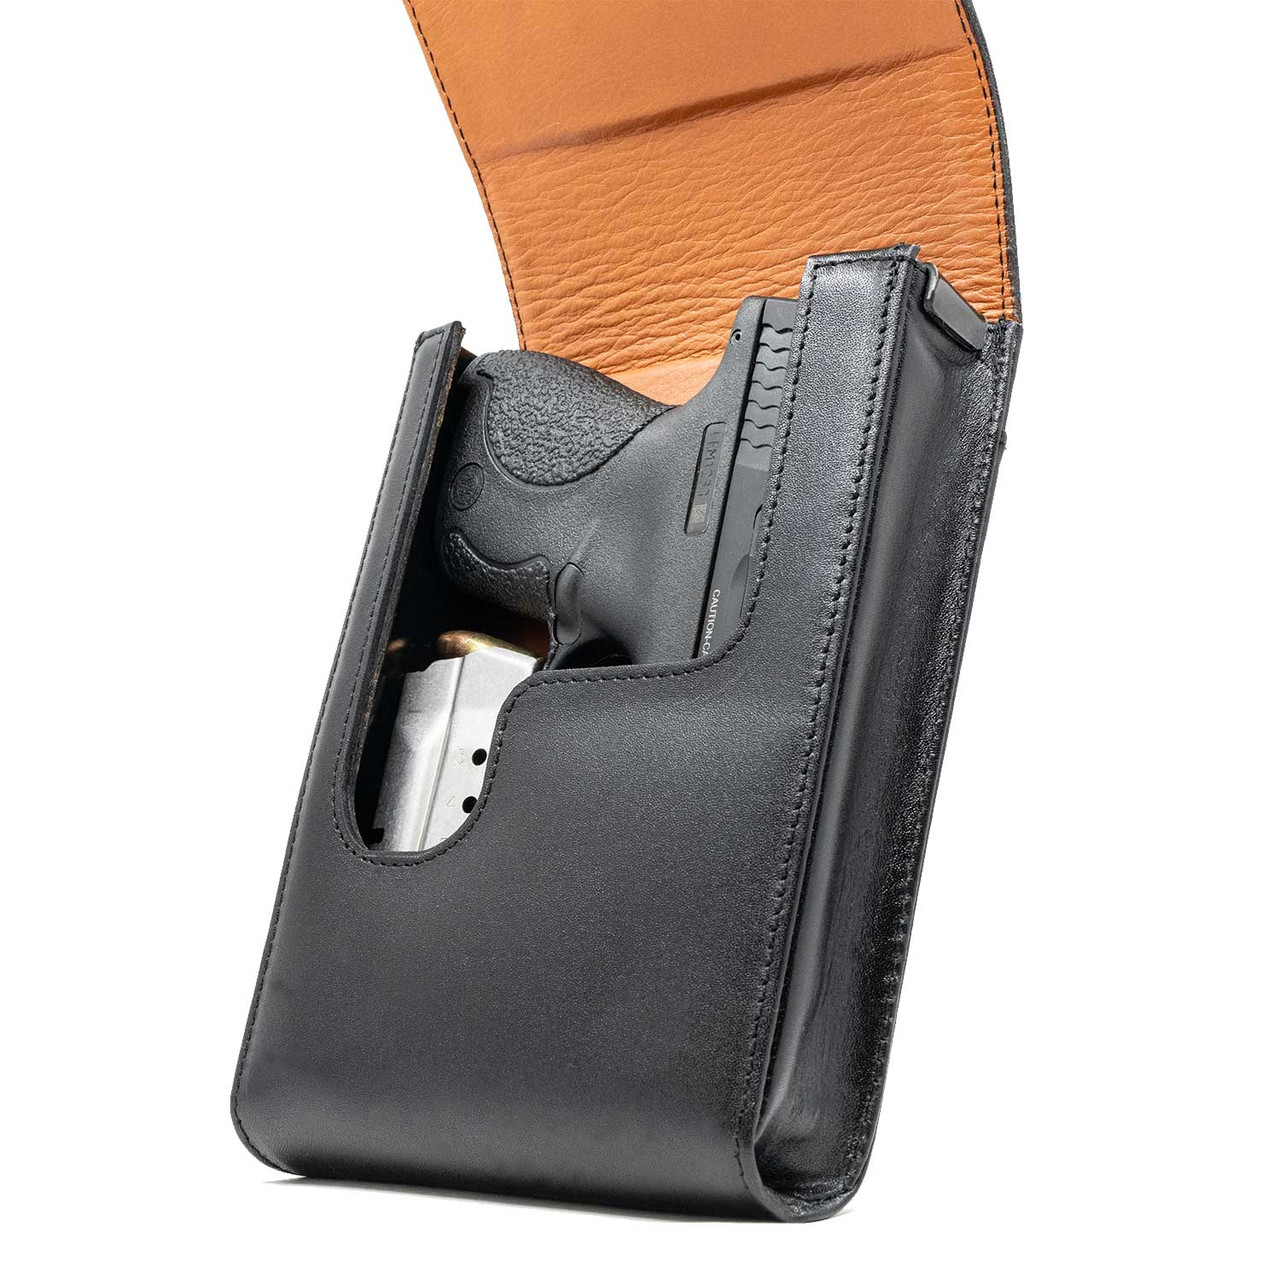 The Bersa Firestorm .380 Xtra Mag Black Leather Holster